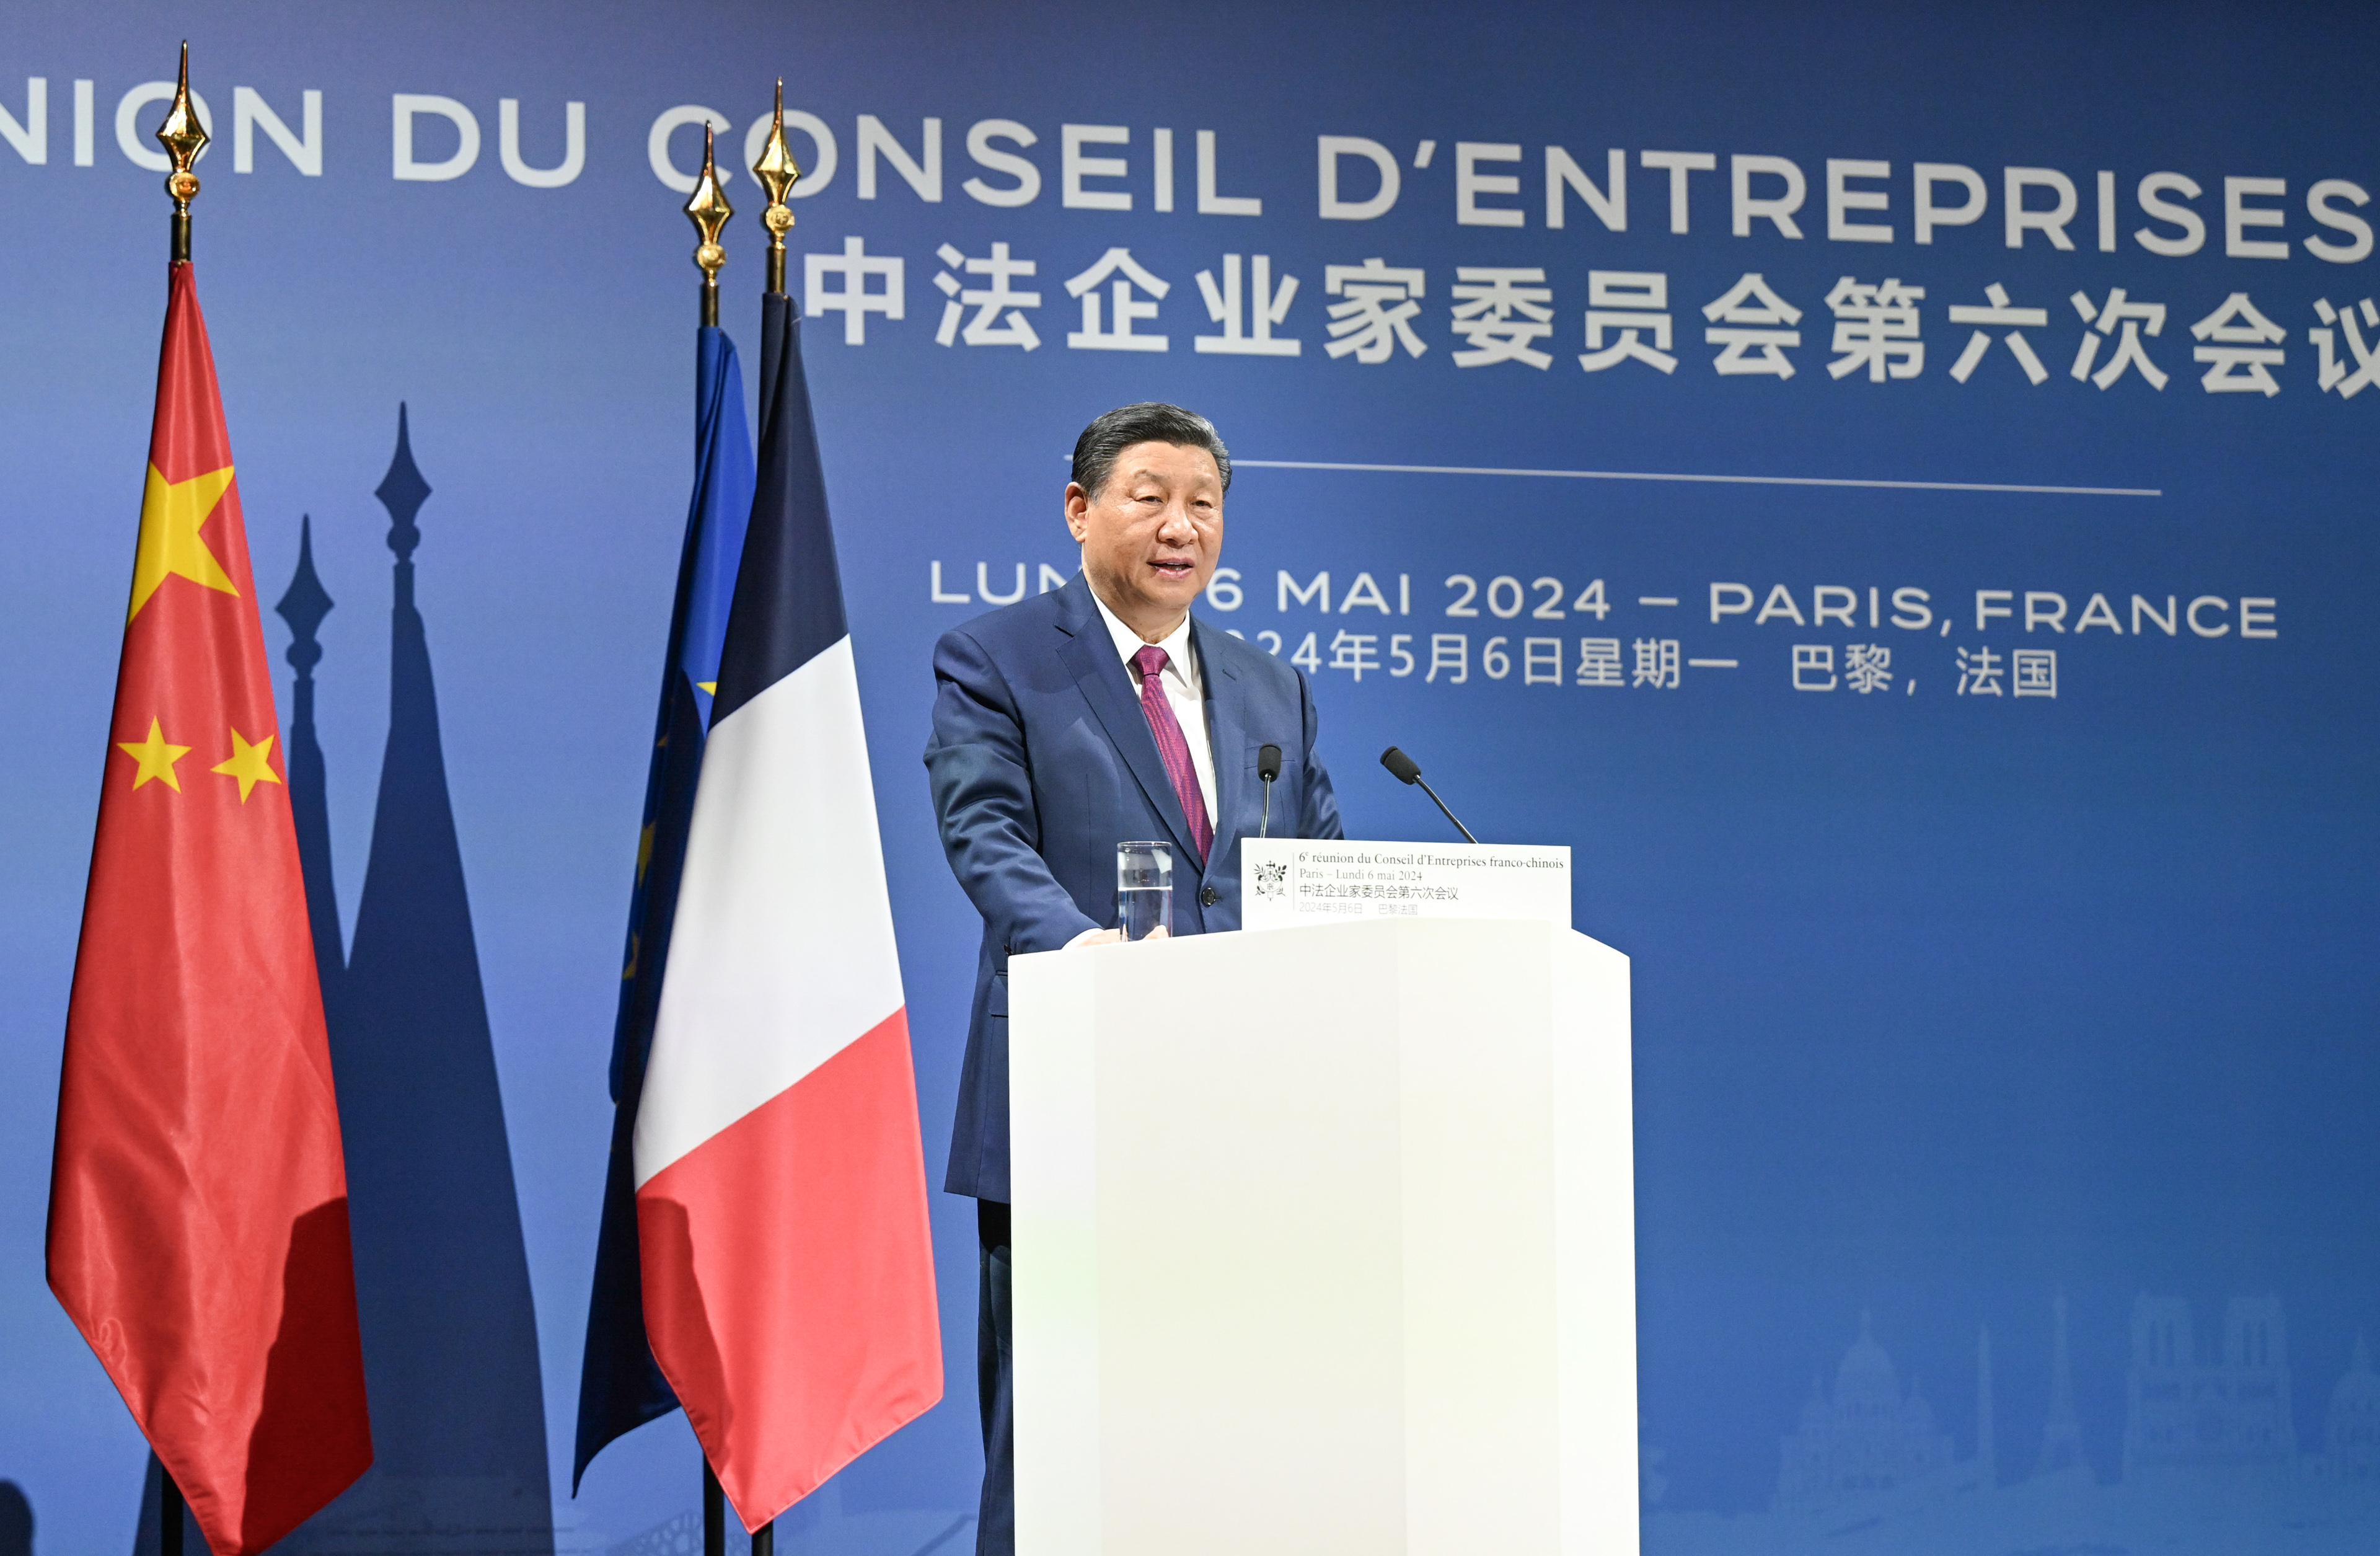 On May 6, local time, President Xi Jinping and President Macron attended the closing ceremony of the Sixth Meeting of the China -French Entrepreneurs Committee in Paris and delivered an important speech.